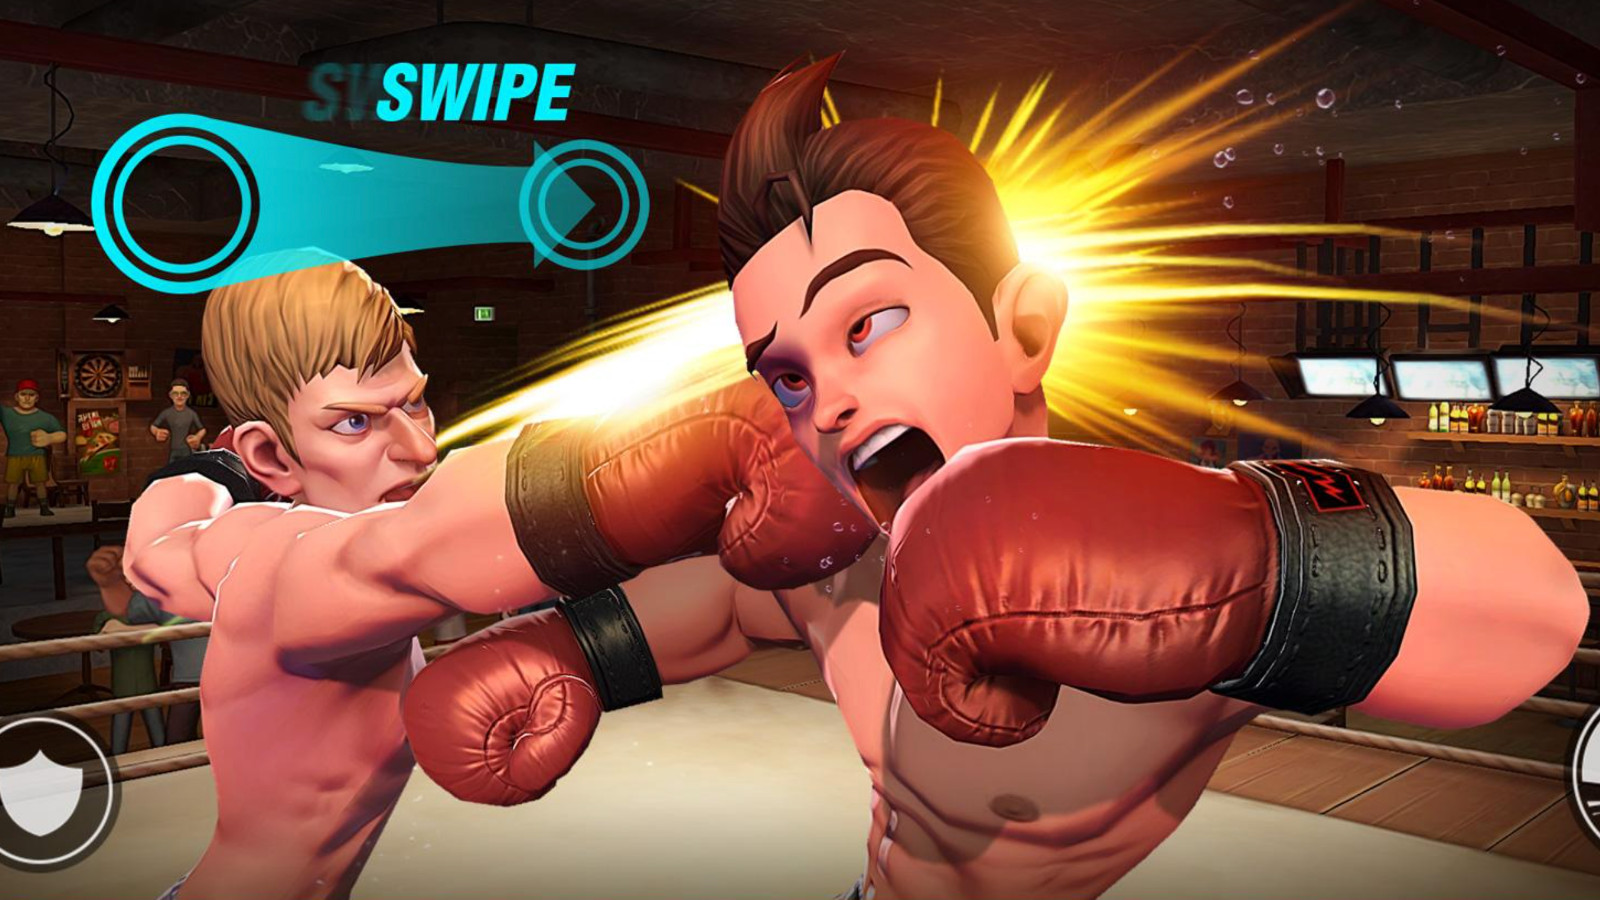 Play Stickman Boxing KO Champion Online for Free on PC & Mobile